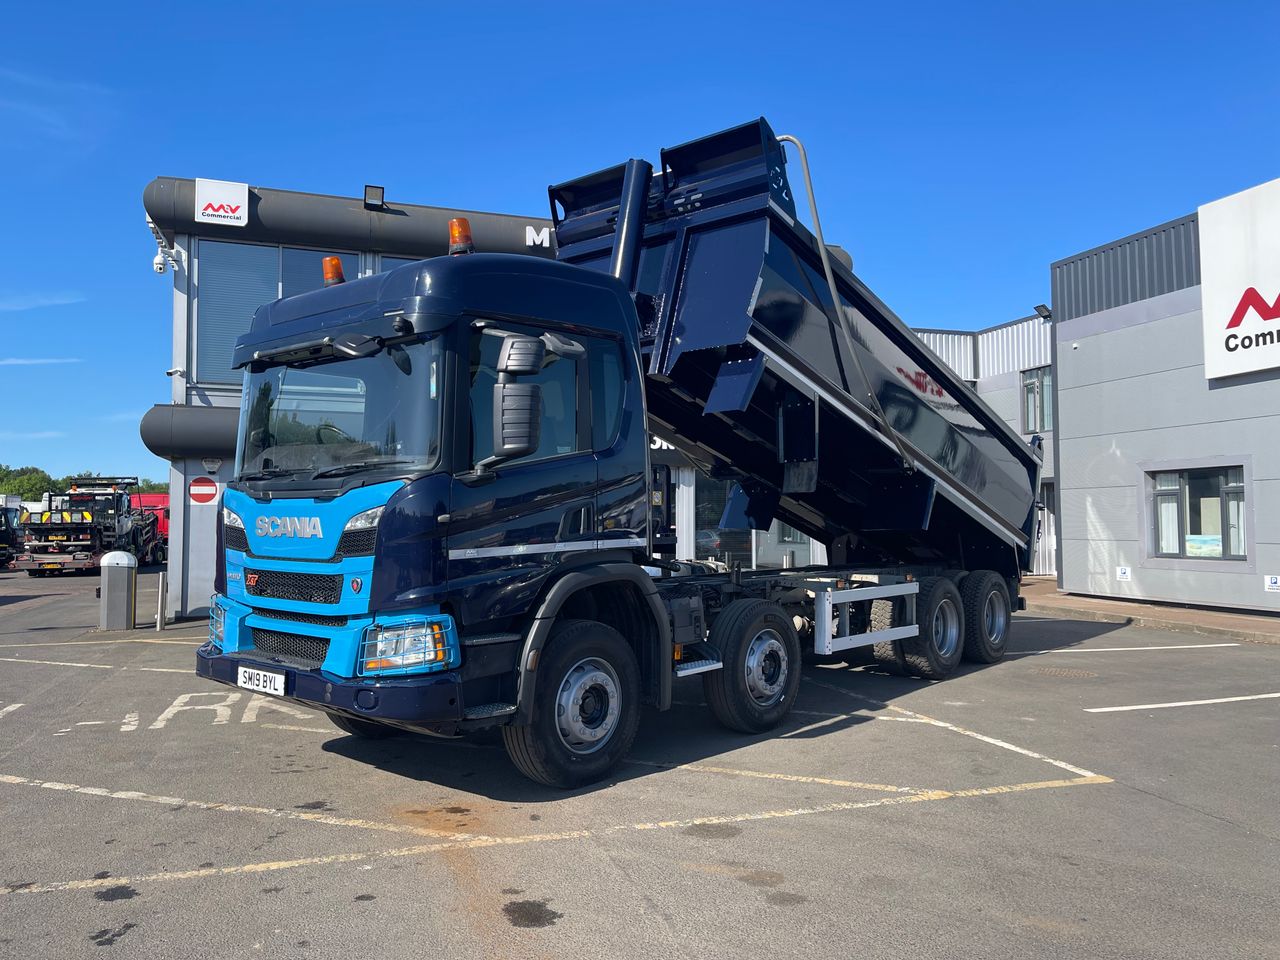 Ready to go Scania P410 XT, Tipper, 410, 32 Tonne, Day Cab, Automatic, Thompson Body with Easy Sheet, Beacons, High Ground Clearance, HYVA Ram, Air Tailgate, , -, - | for sale at MV Commercial, the UKs leading Truck, Trailers and Van supplier. (SM19BYL 348997)